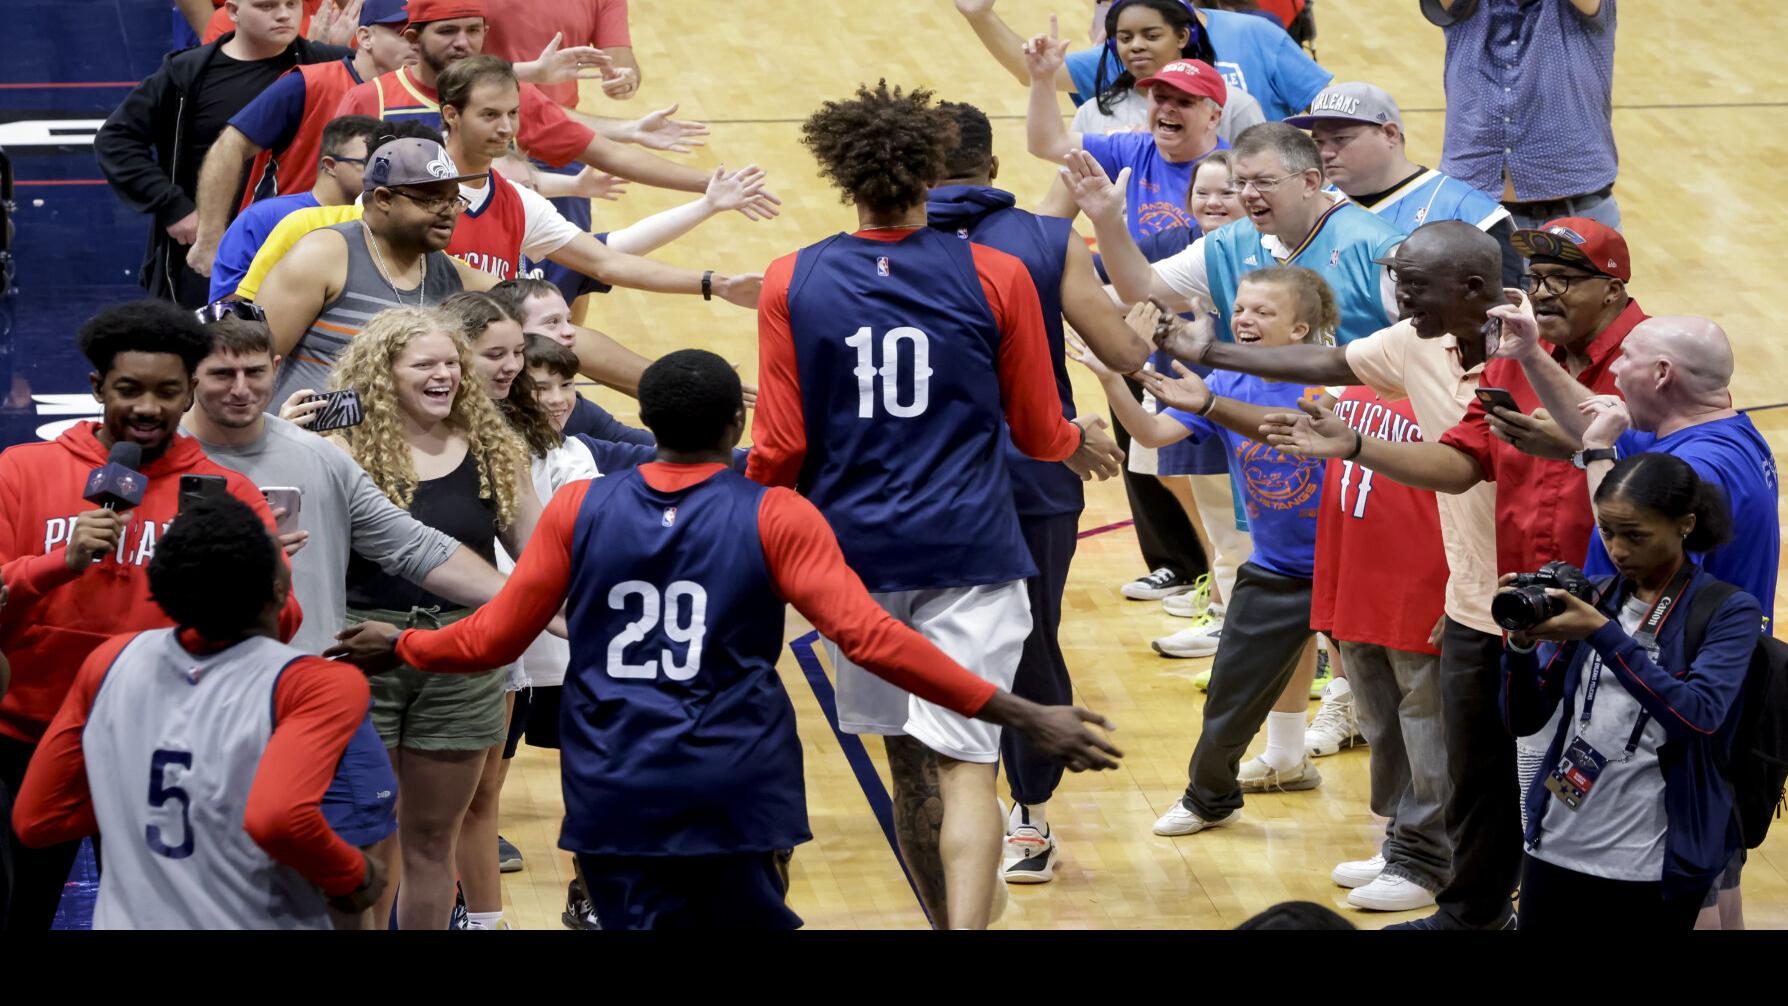 Pelicans to host open practice at Smoothie King Center on October 8